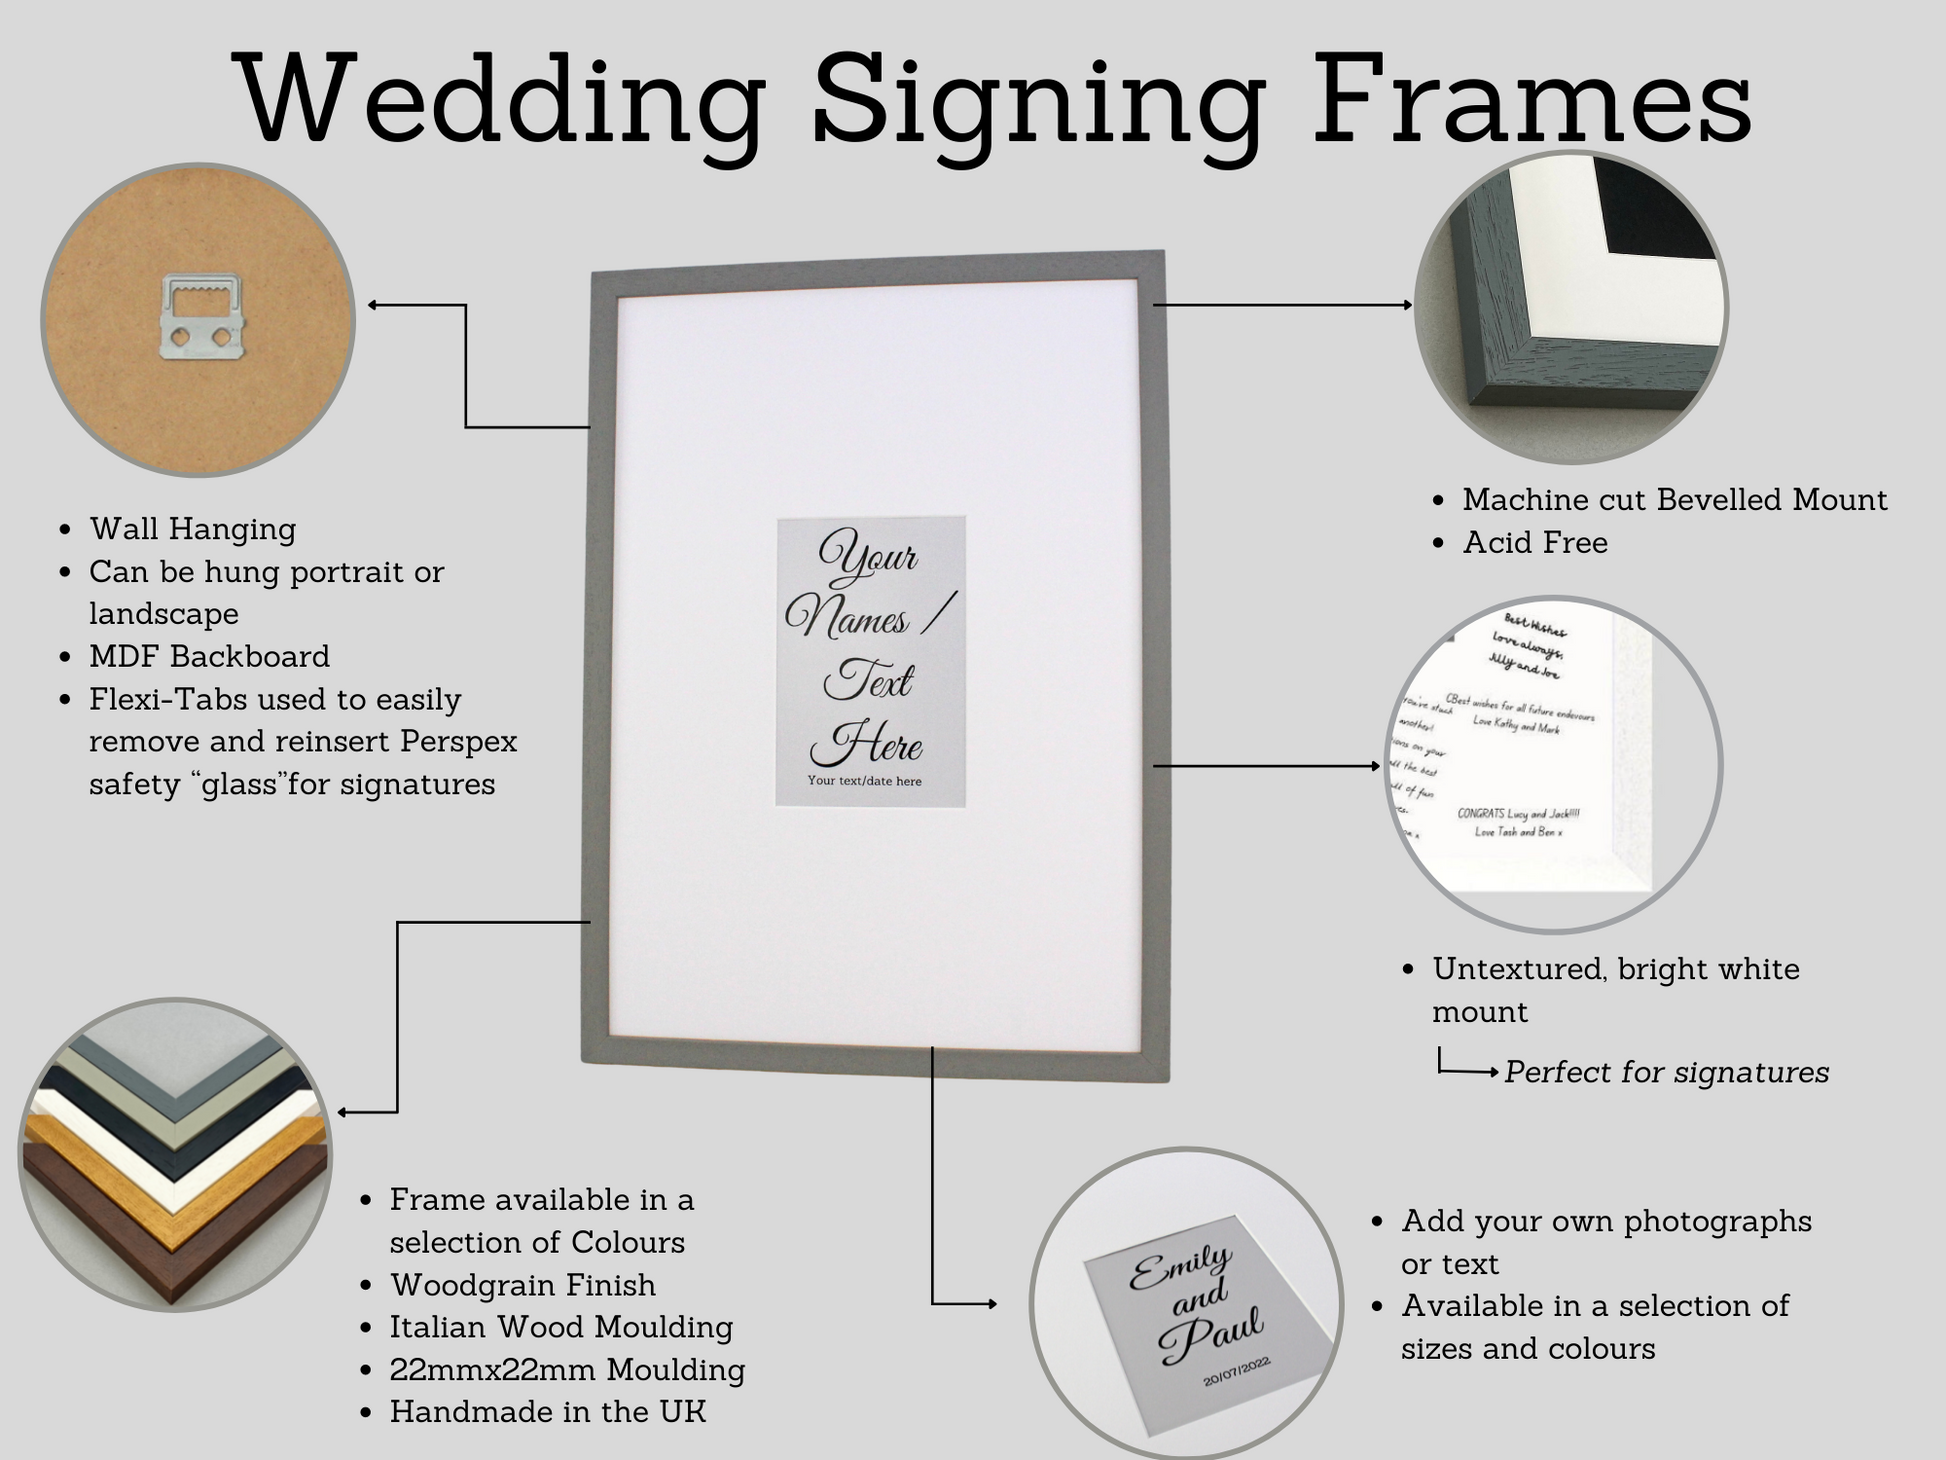 Wedding Signing Frames. 40x50cm. With 8x6" Aperture for personalised Name/Quote or for a Photo. Wedding Guestbook. Handmade by Art@Home. - PhotoFramesandMore - Wooden Picture Frames